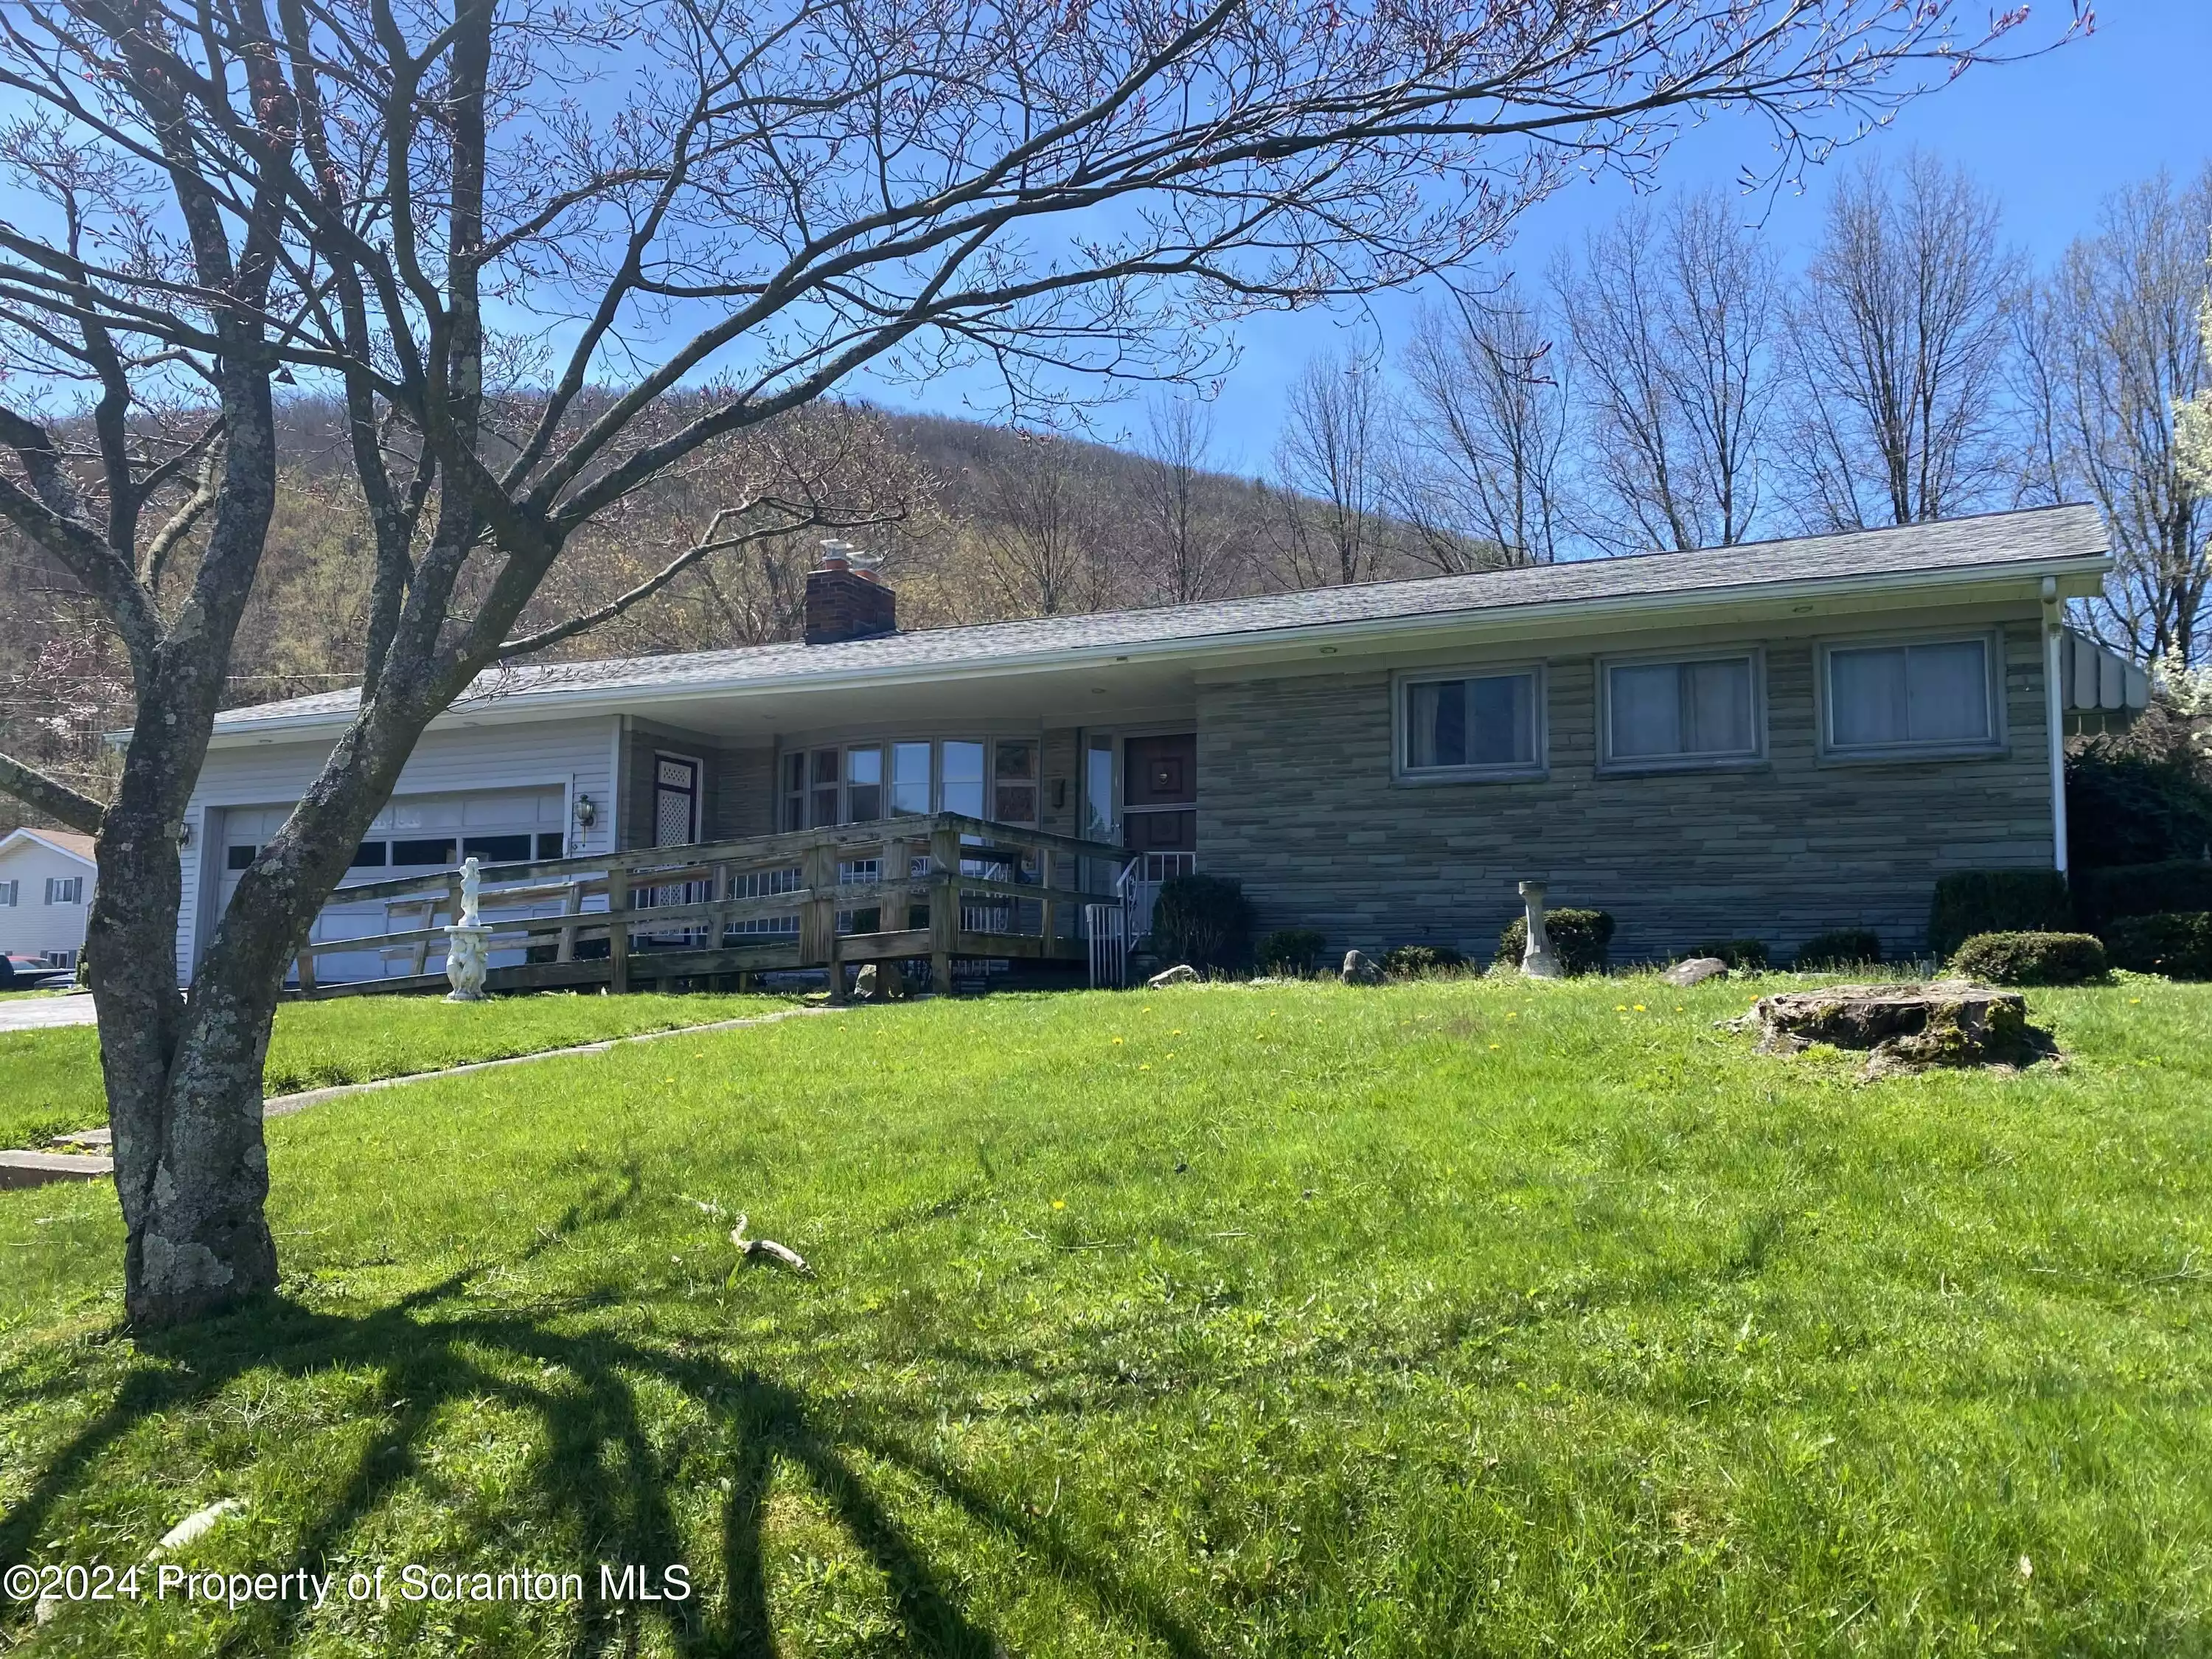 10 Mary Street, Scott Twp, Pennsylvania 18447, 6 Rooms Rooms,2 BathroomsBathrooms,Residential,For Sale,Mary,GSBSC1833